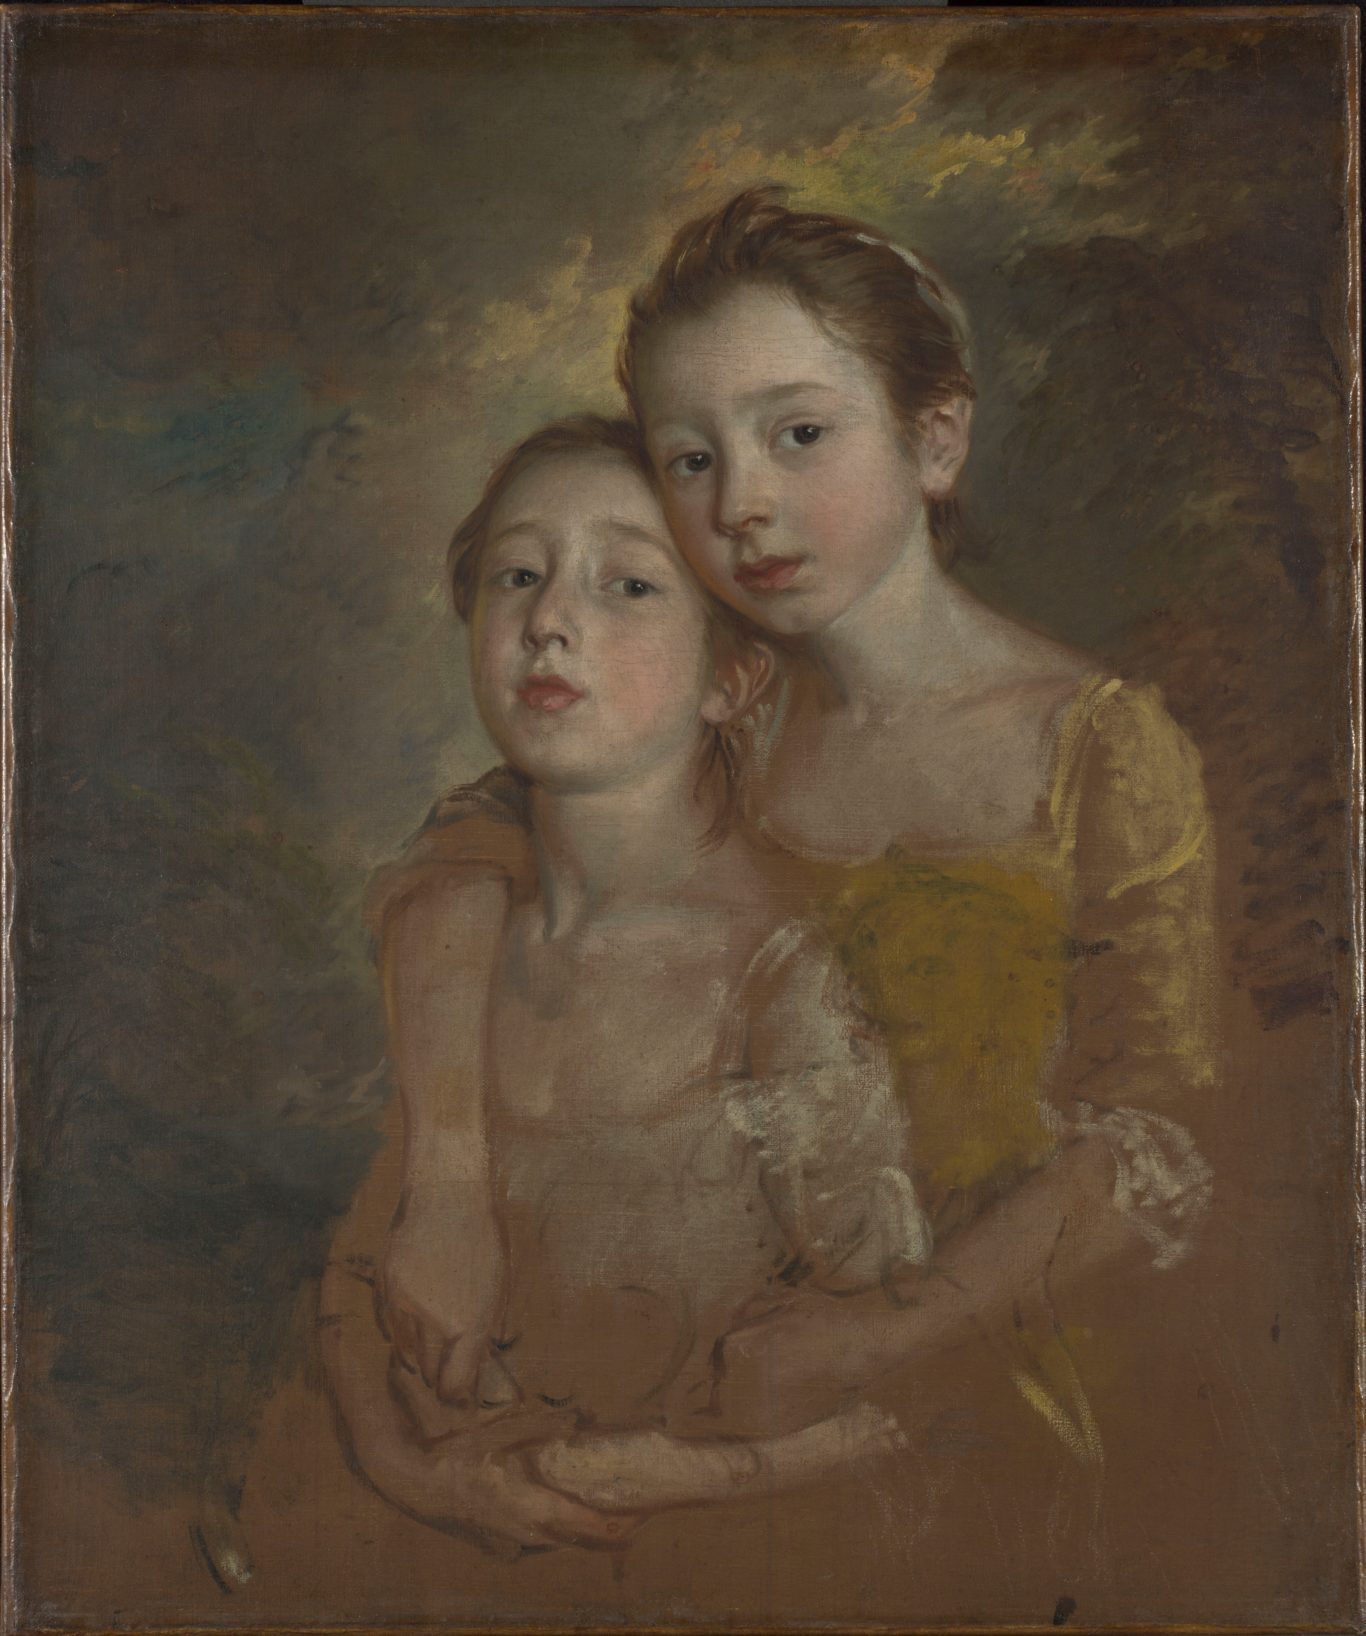 Thomas Gainsborough paintings of ‘ordinary people' the focus of new ...